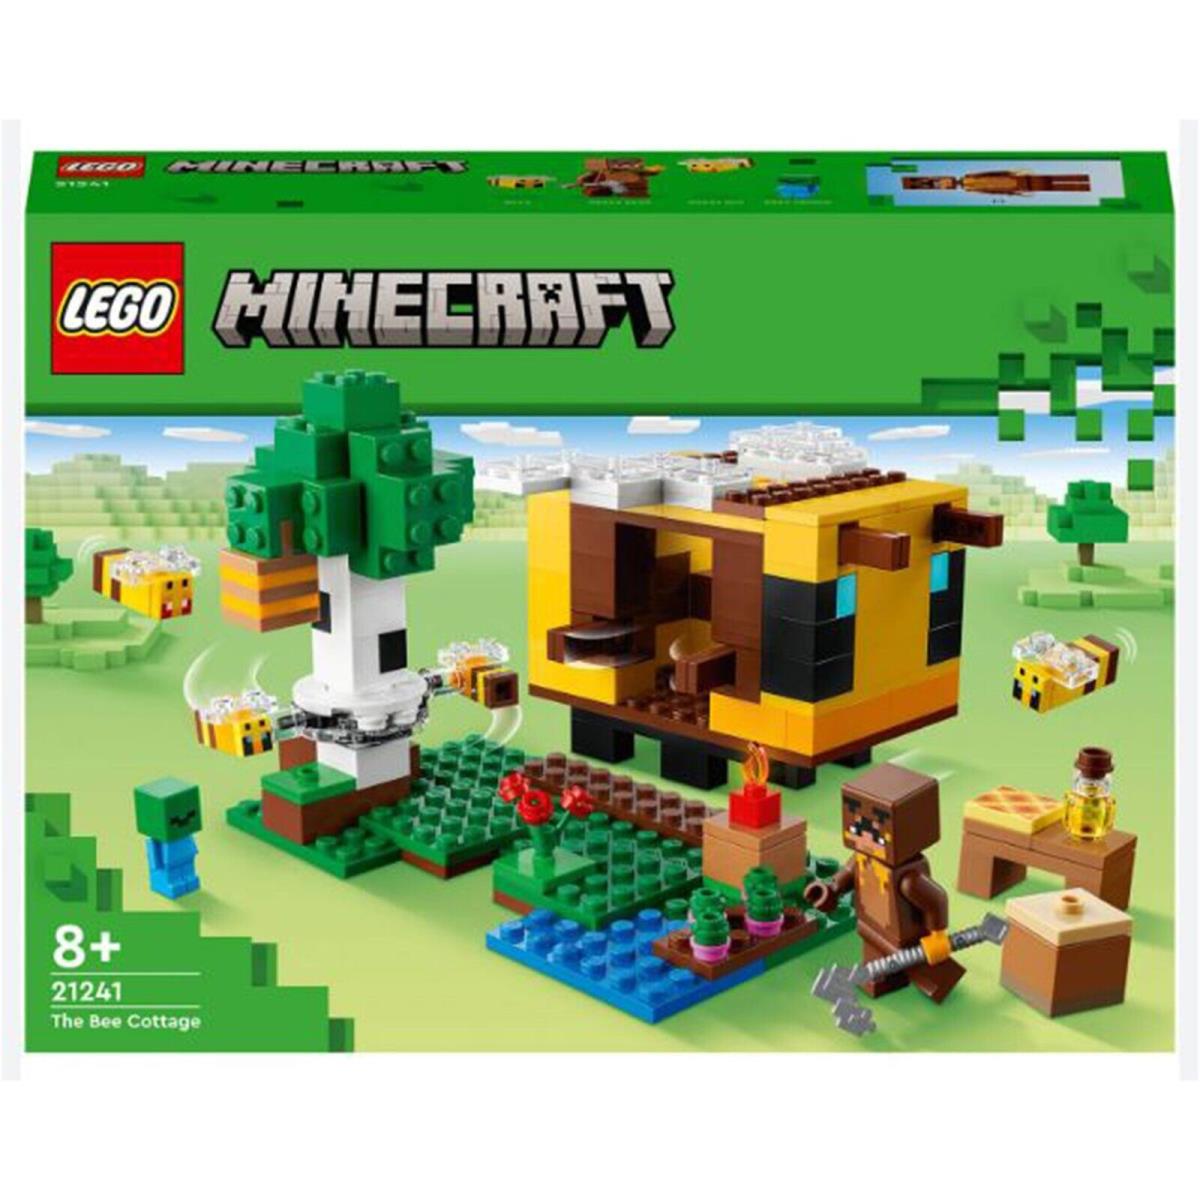 Lego Minecraft The Bee Cottage Building Set 21241